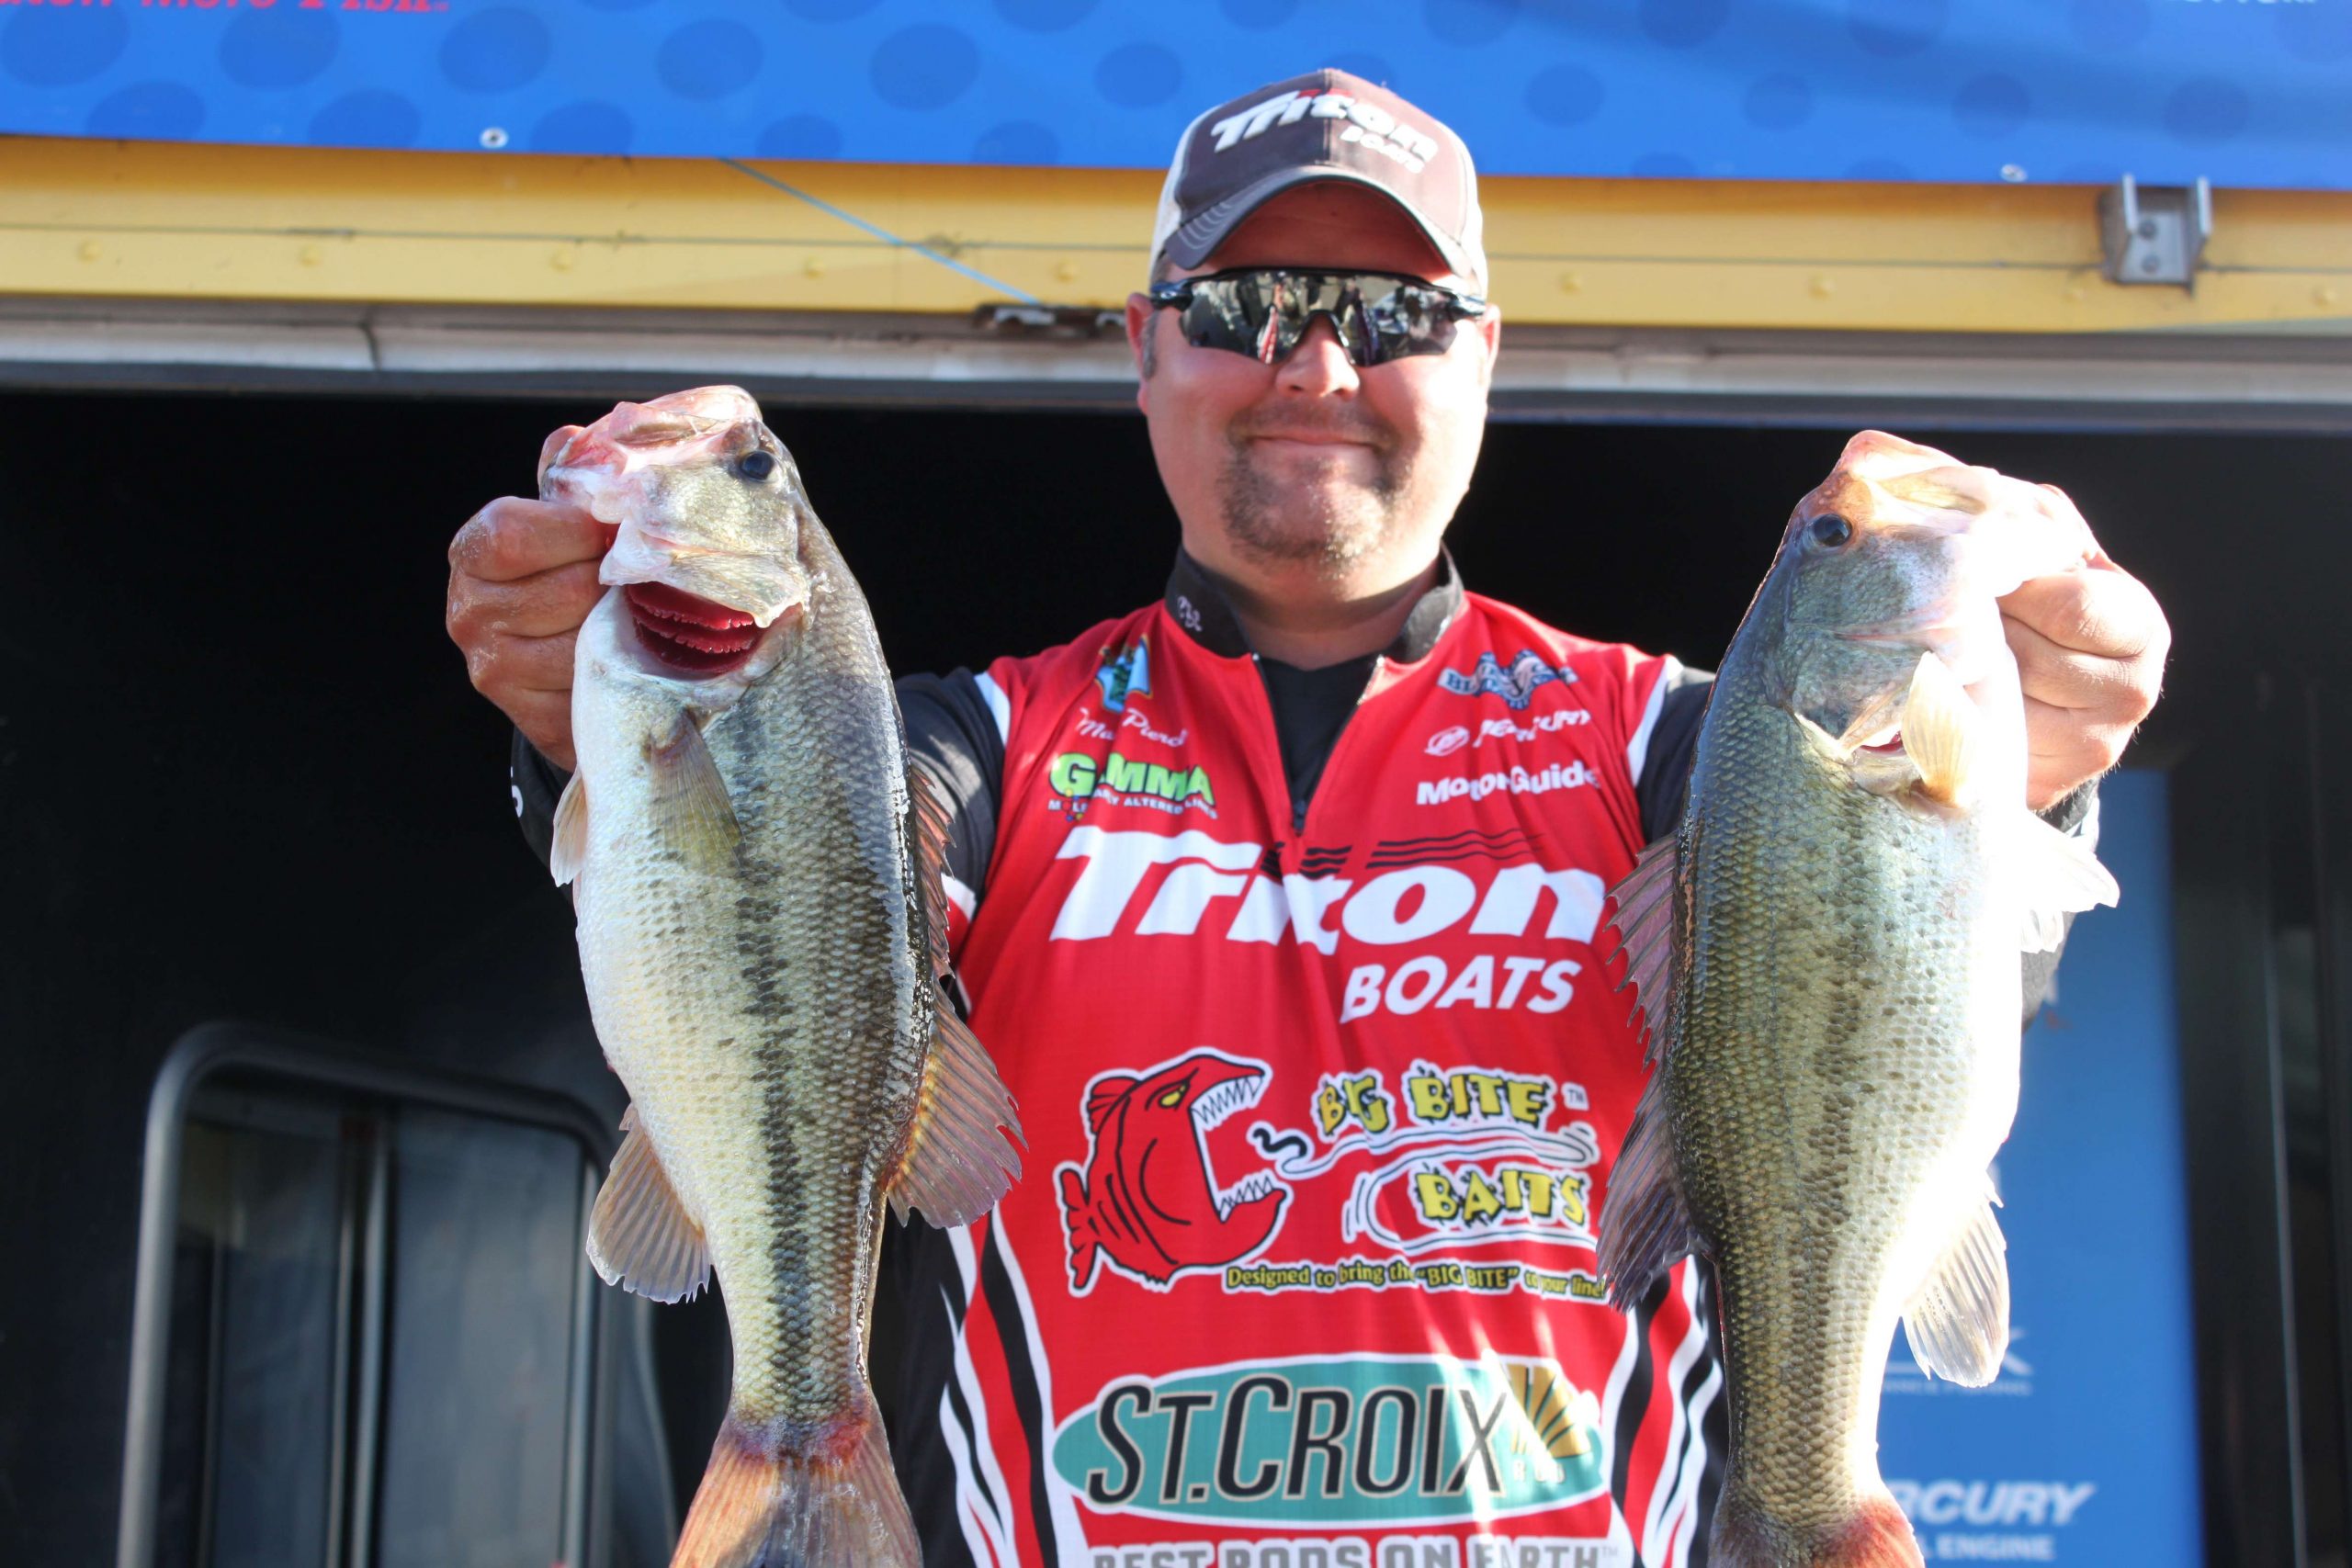  Mark Pierce of Team Tennessee is 19th in the boater field with a two-day total of 29-8.
